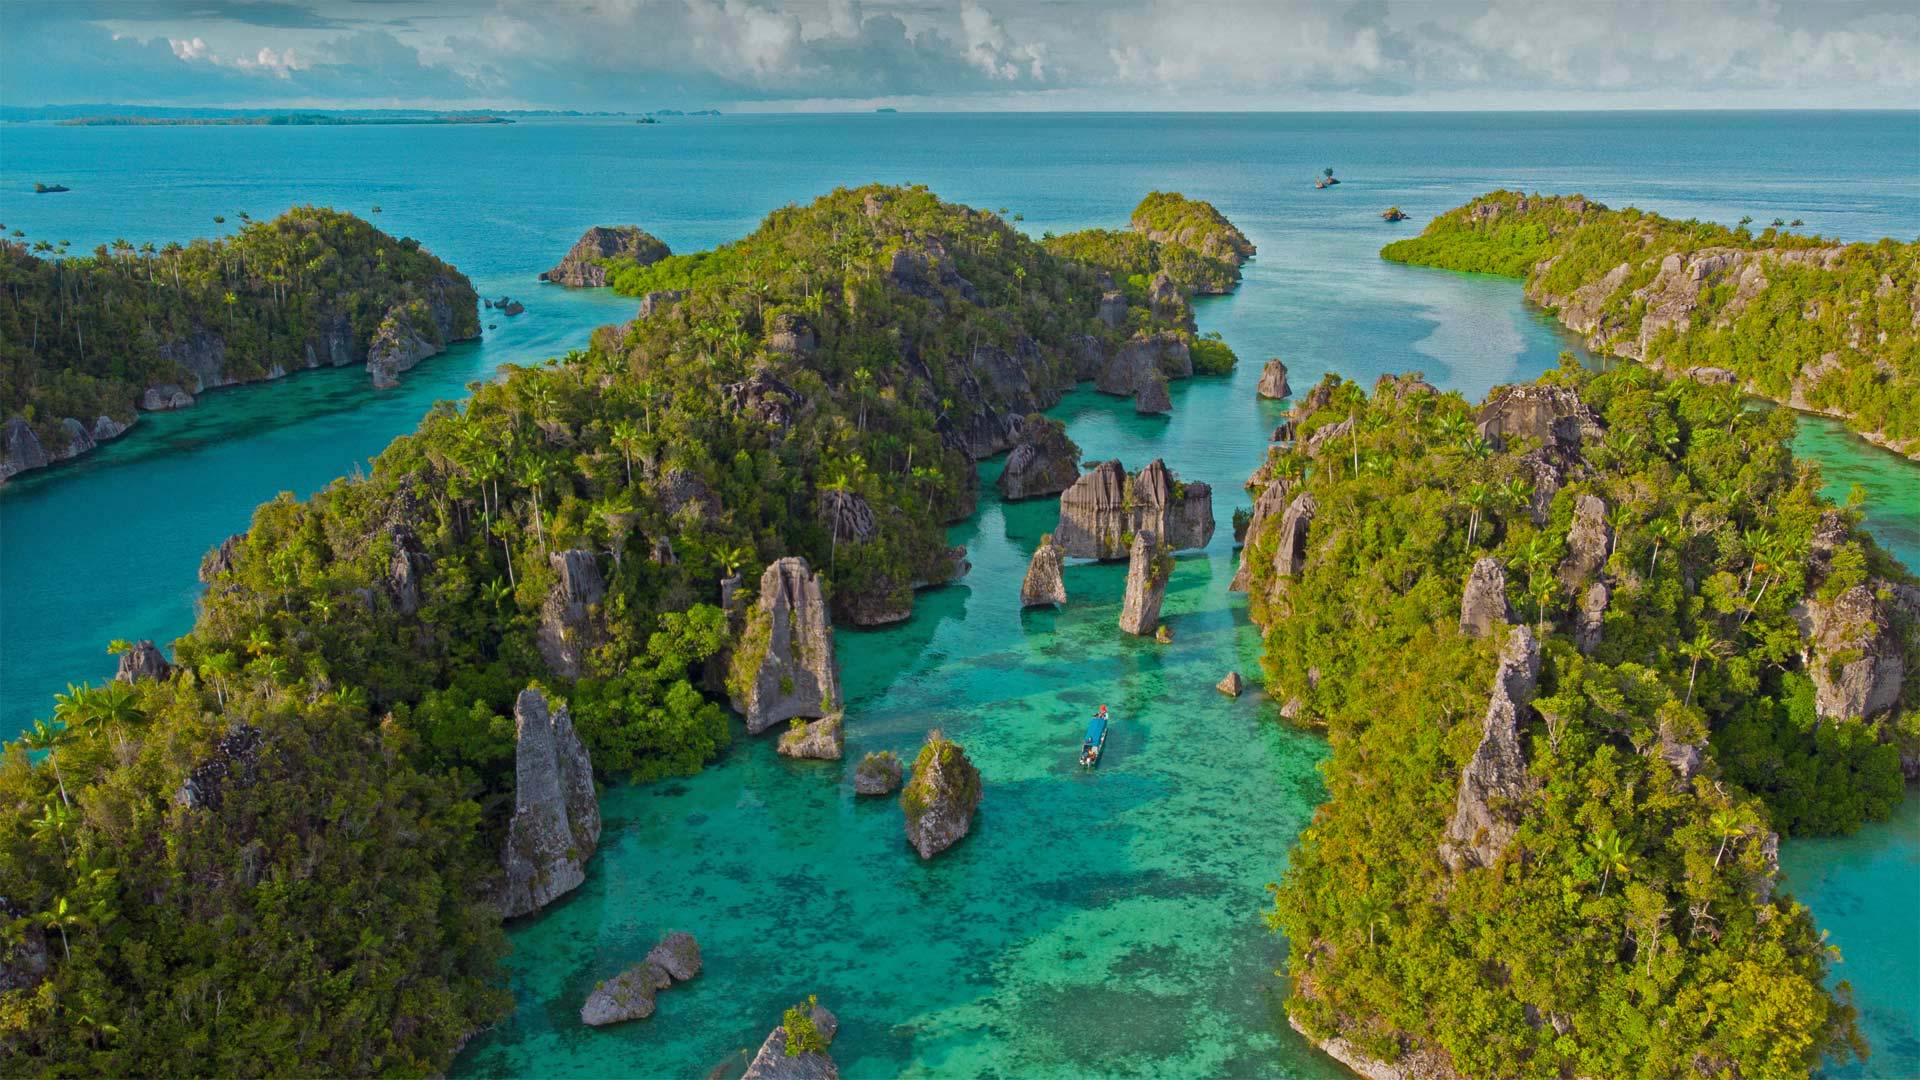 Misool Island, one of the four major islands in the Raja Ampat Islands in West Papua, Indonesia - Elsy Saldek/Getty Images)